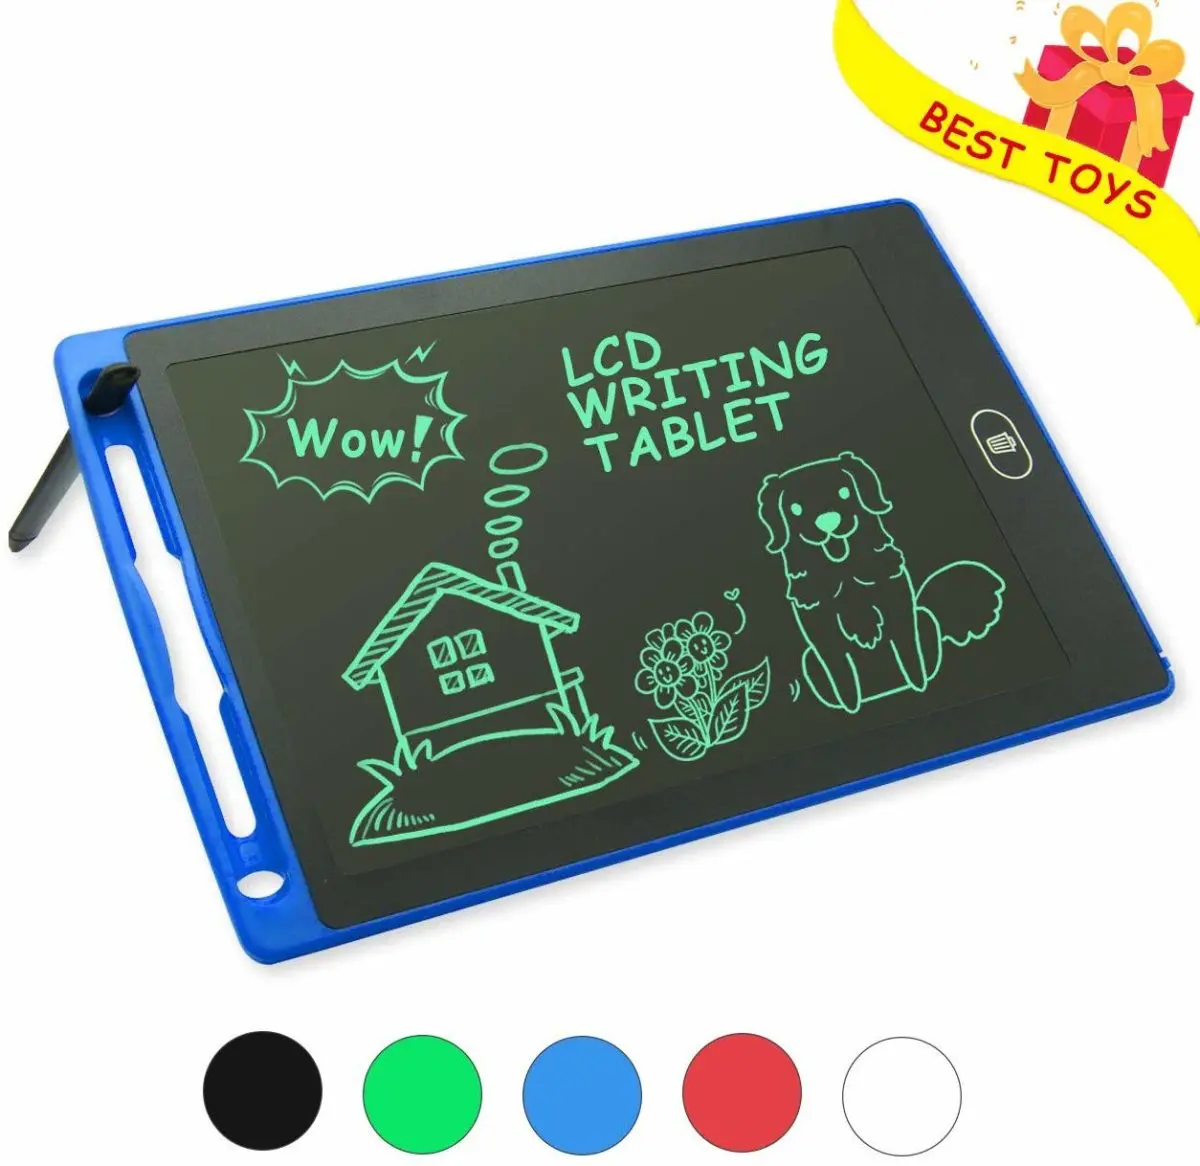 Matesy Reusable Drawing Toys LCD Writing Tablet - Top Toys and Gifts for Six Year Old Boys 1